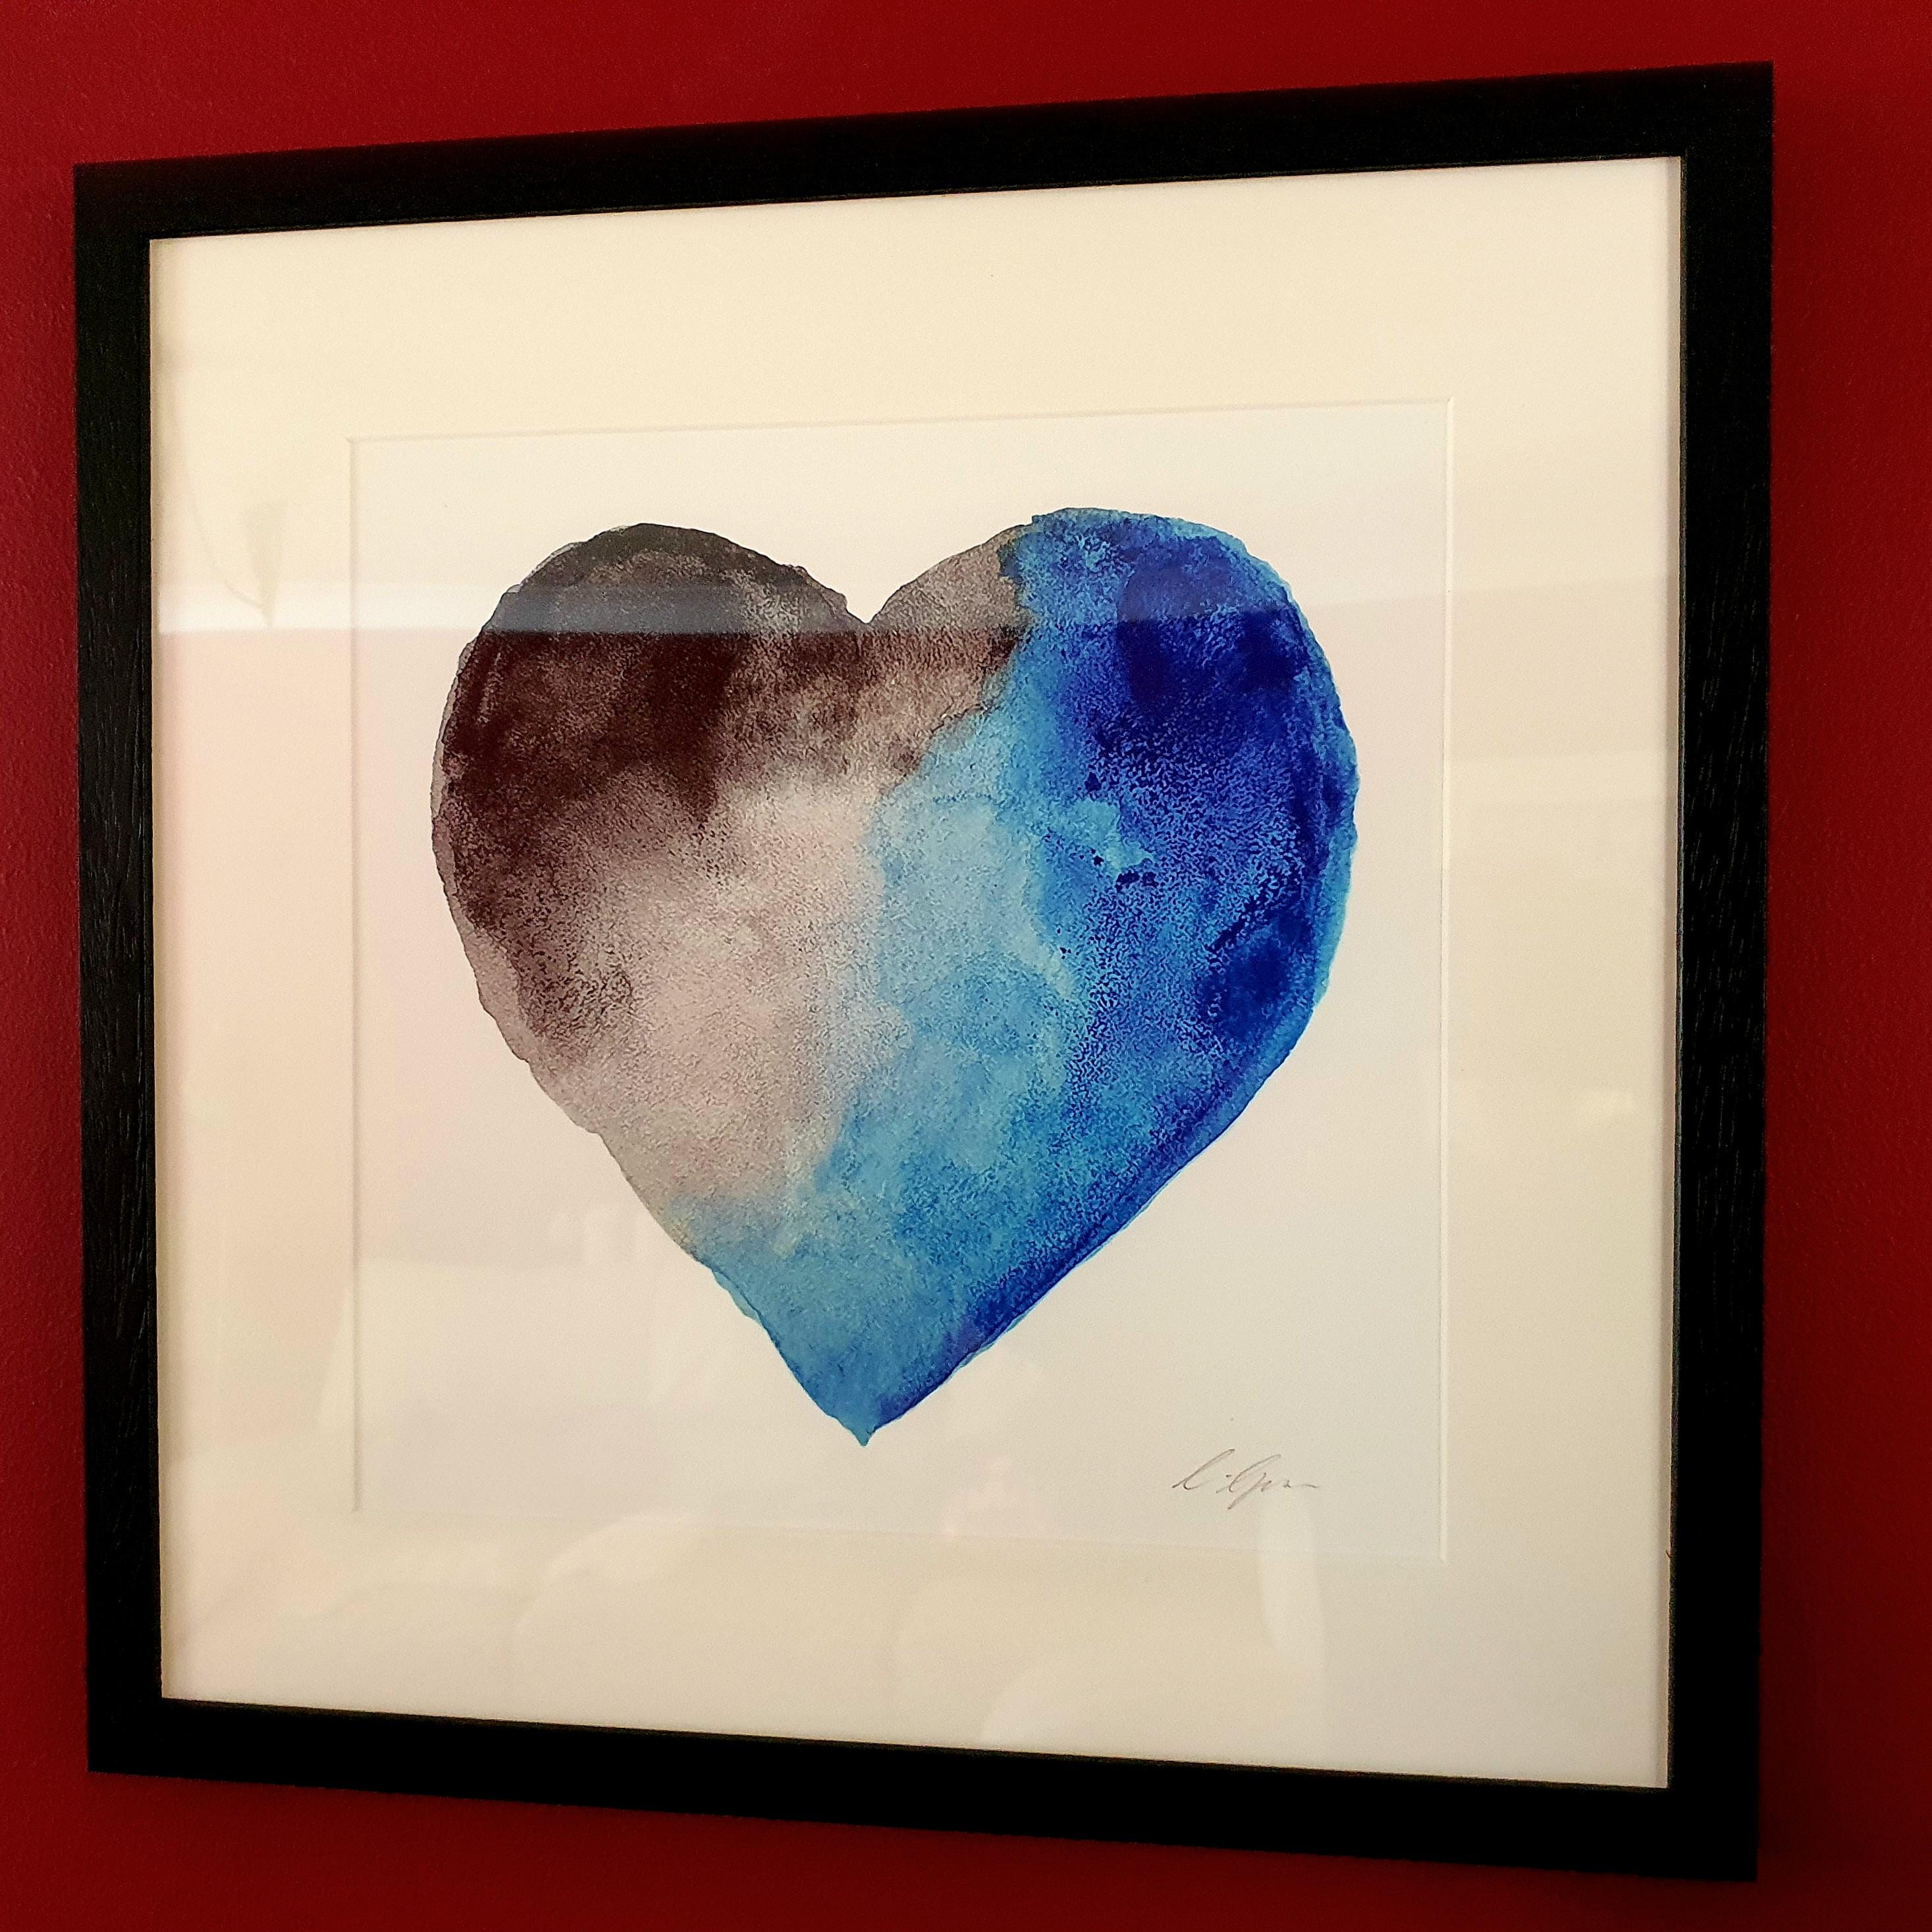 A watercolour print by Clarrie-Anne on eco fine art paper titled Thunder Heart showing a blue and greyscale watercolour heart on a white background.